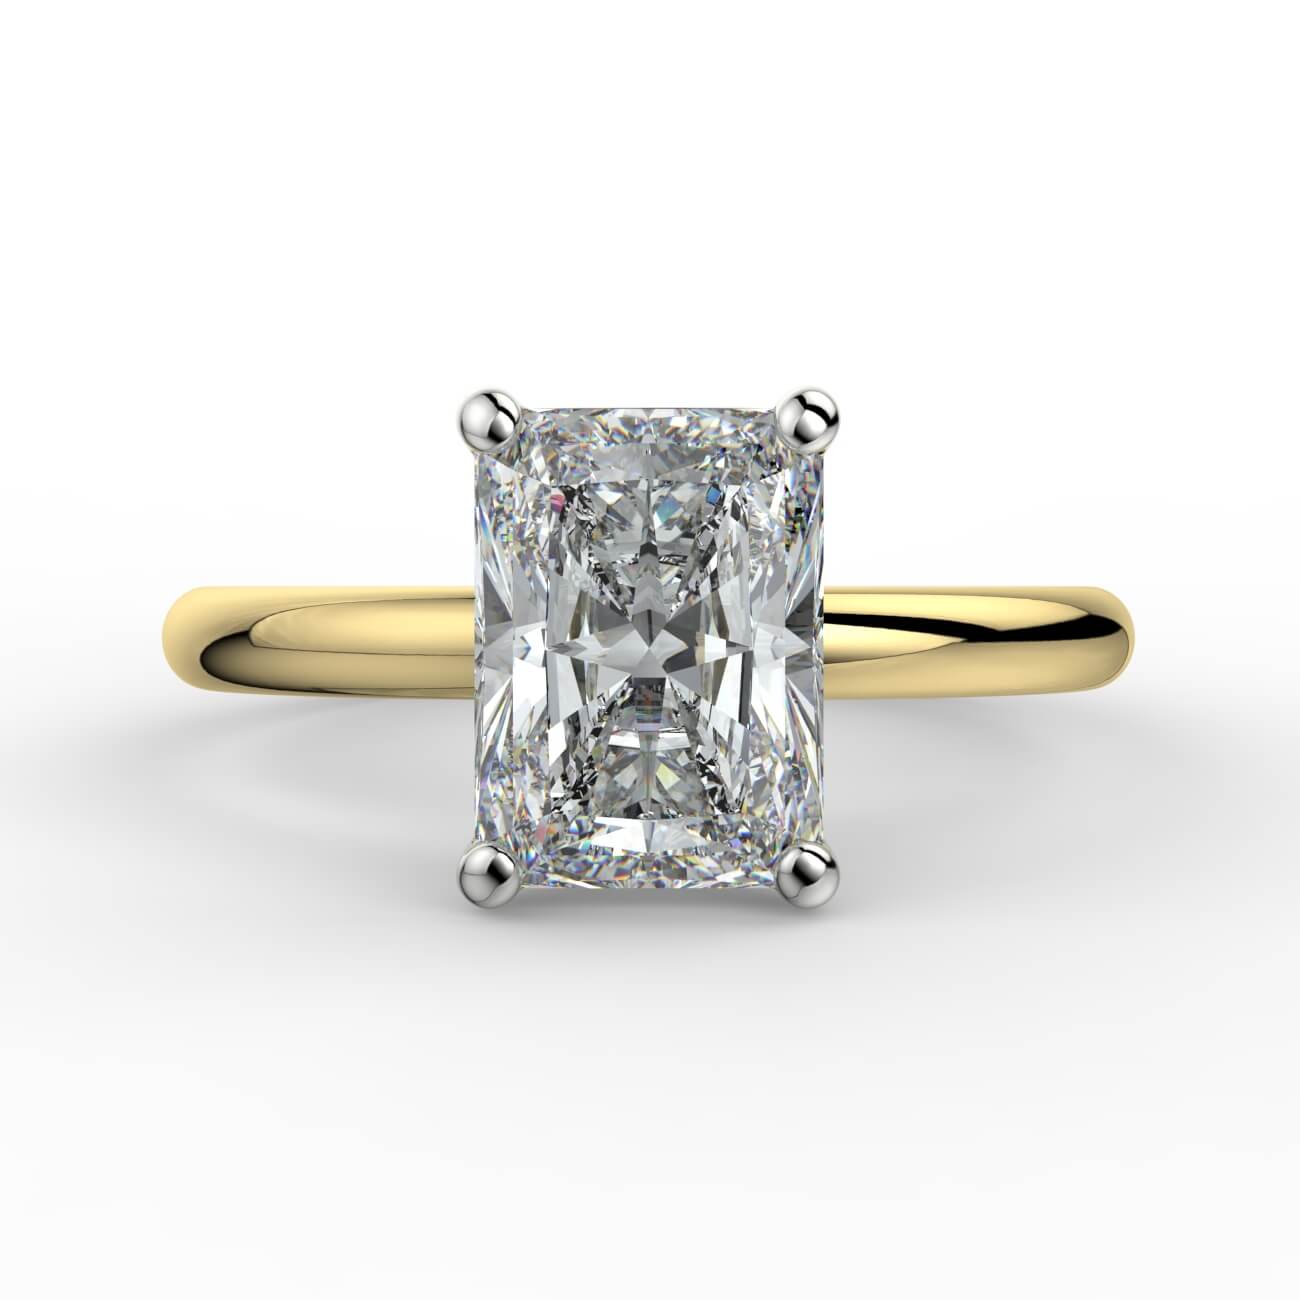 Solitaire radiant cut diamond engagement ring in yellow and white gold – Australian Diamond Network